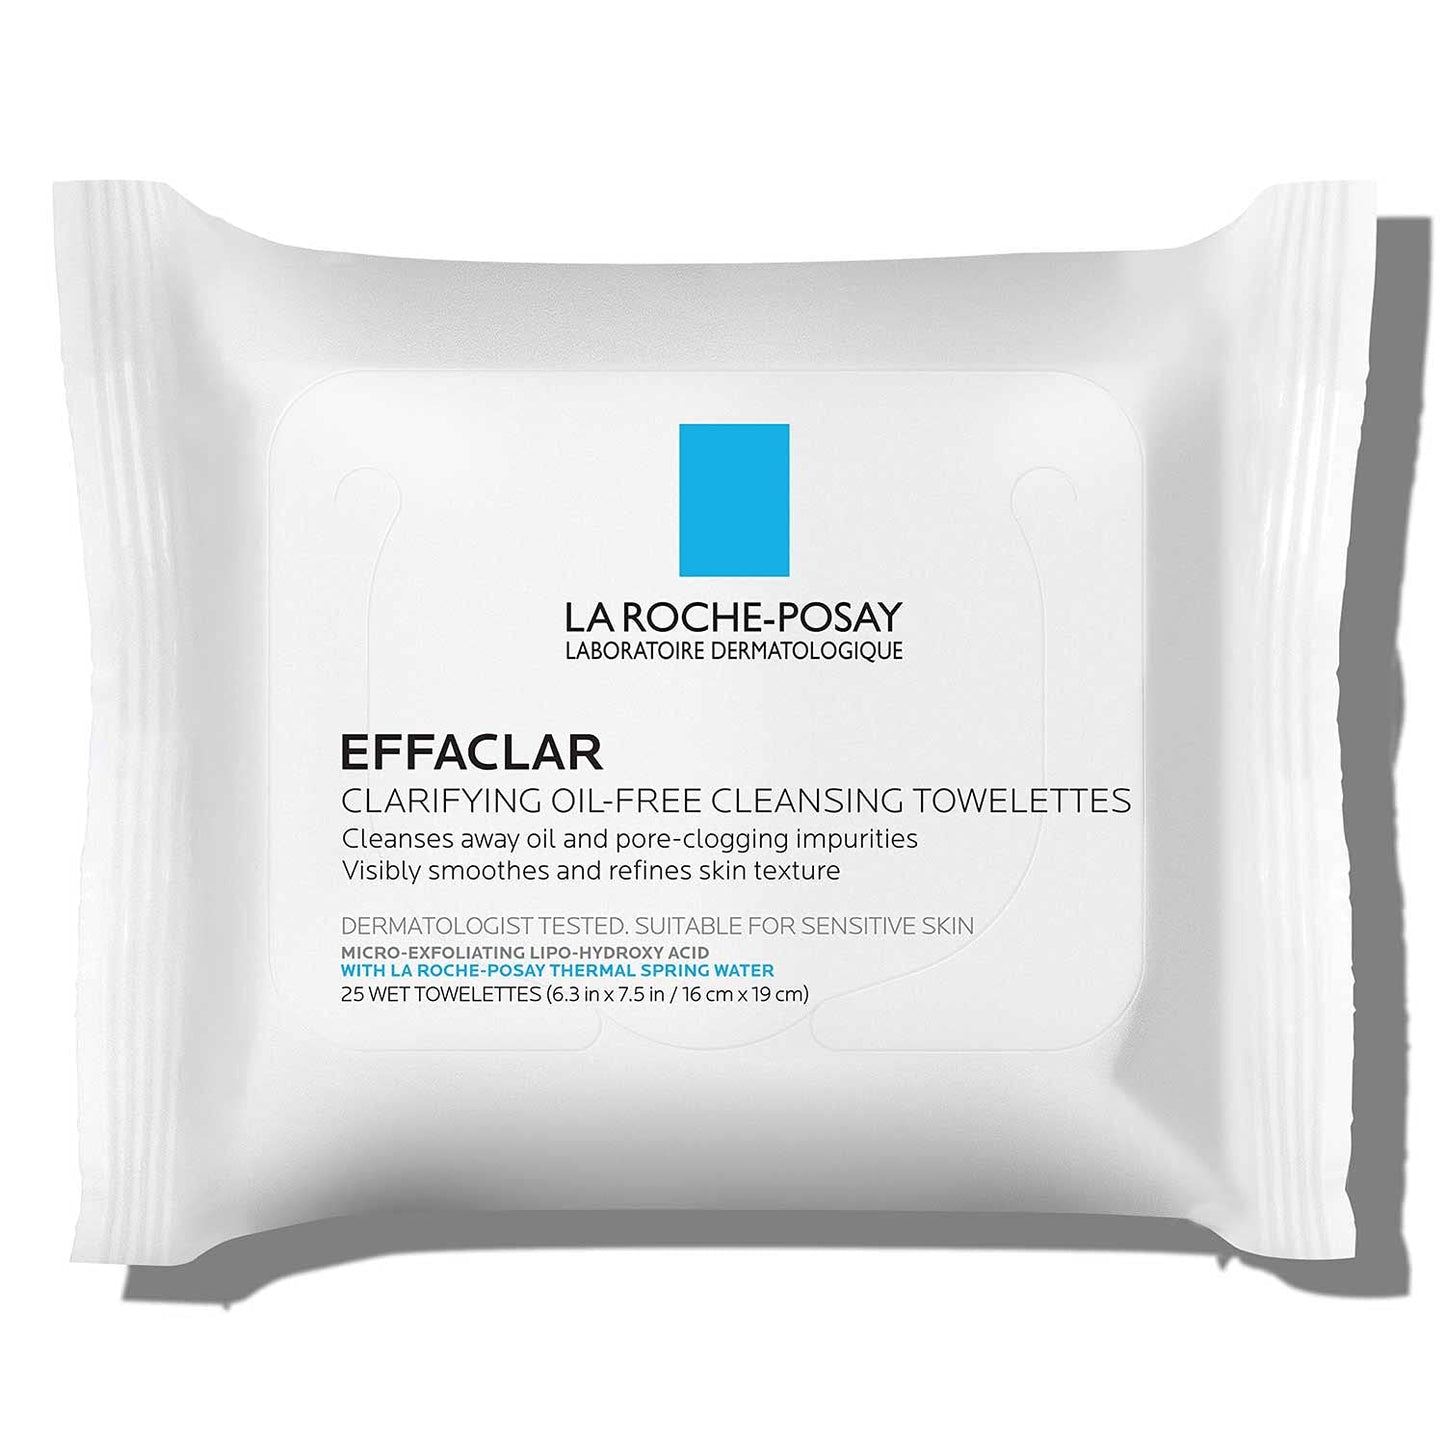 La Roche-Posay Effaclar Oil-Free Cleansing Face Wipes